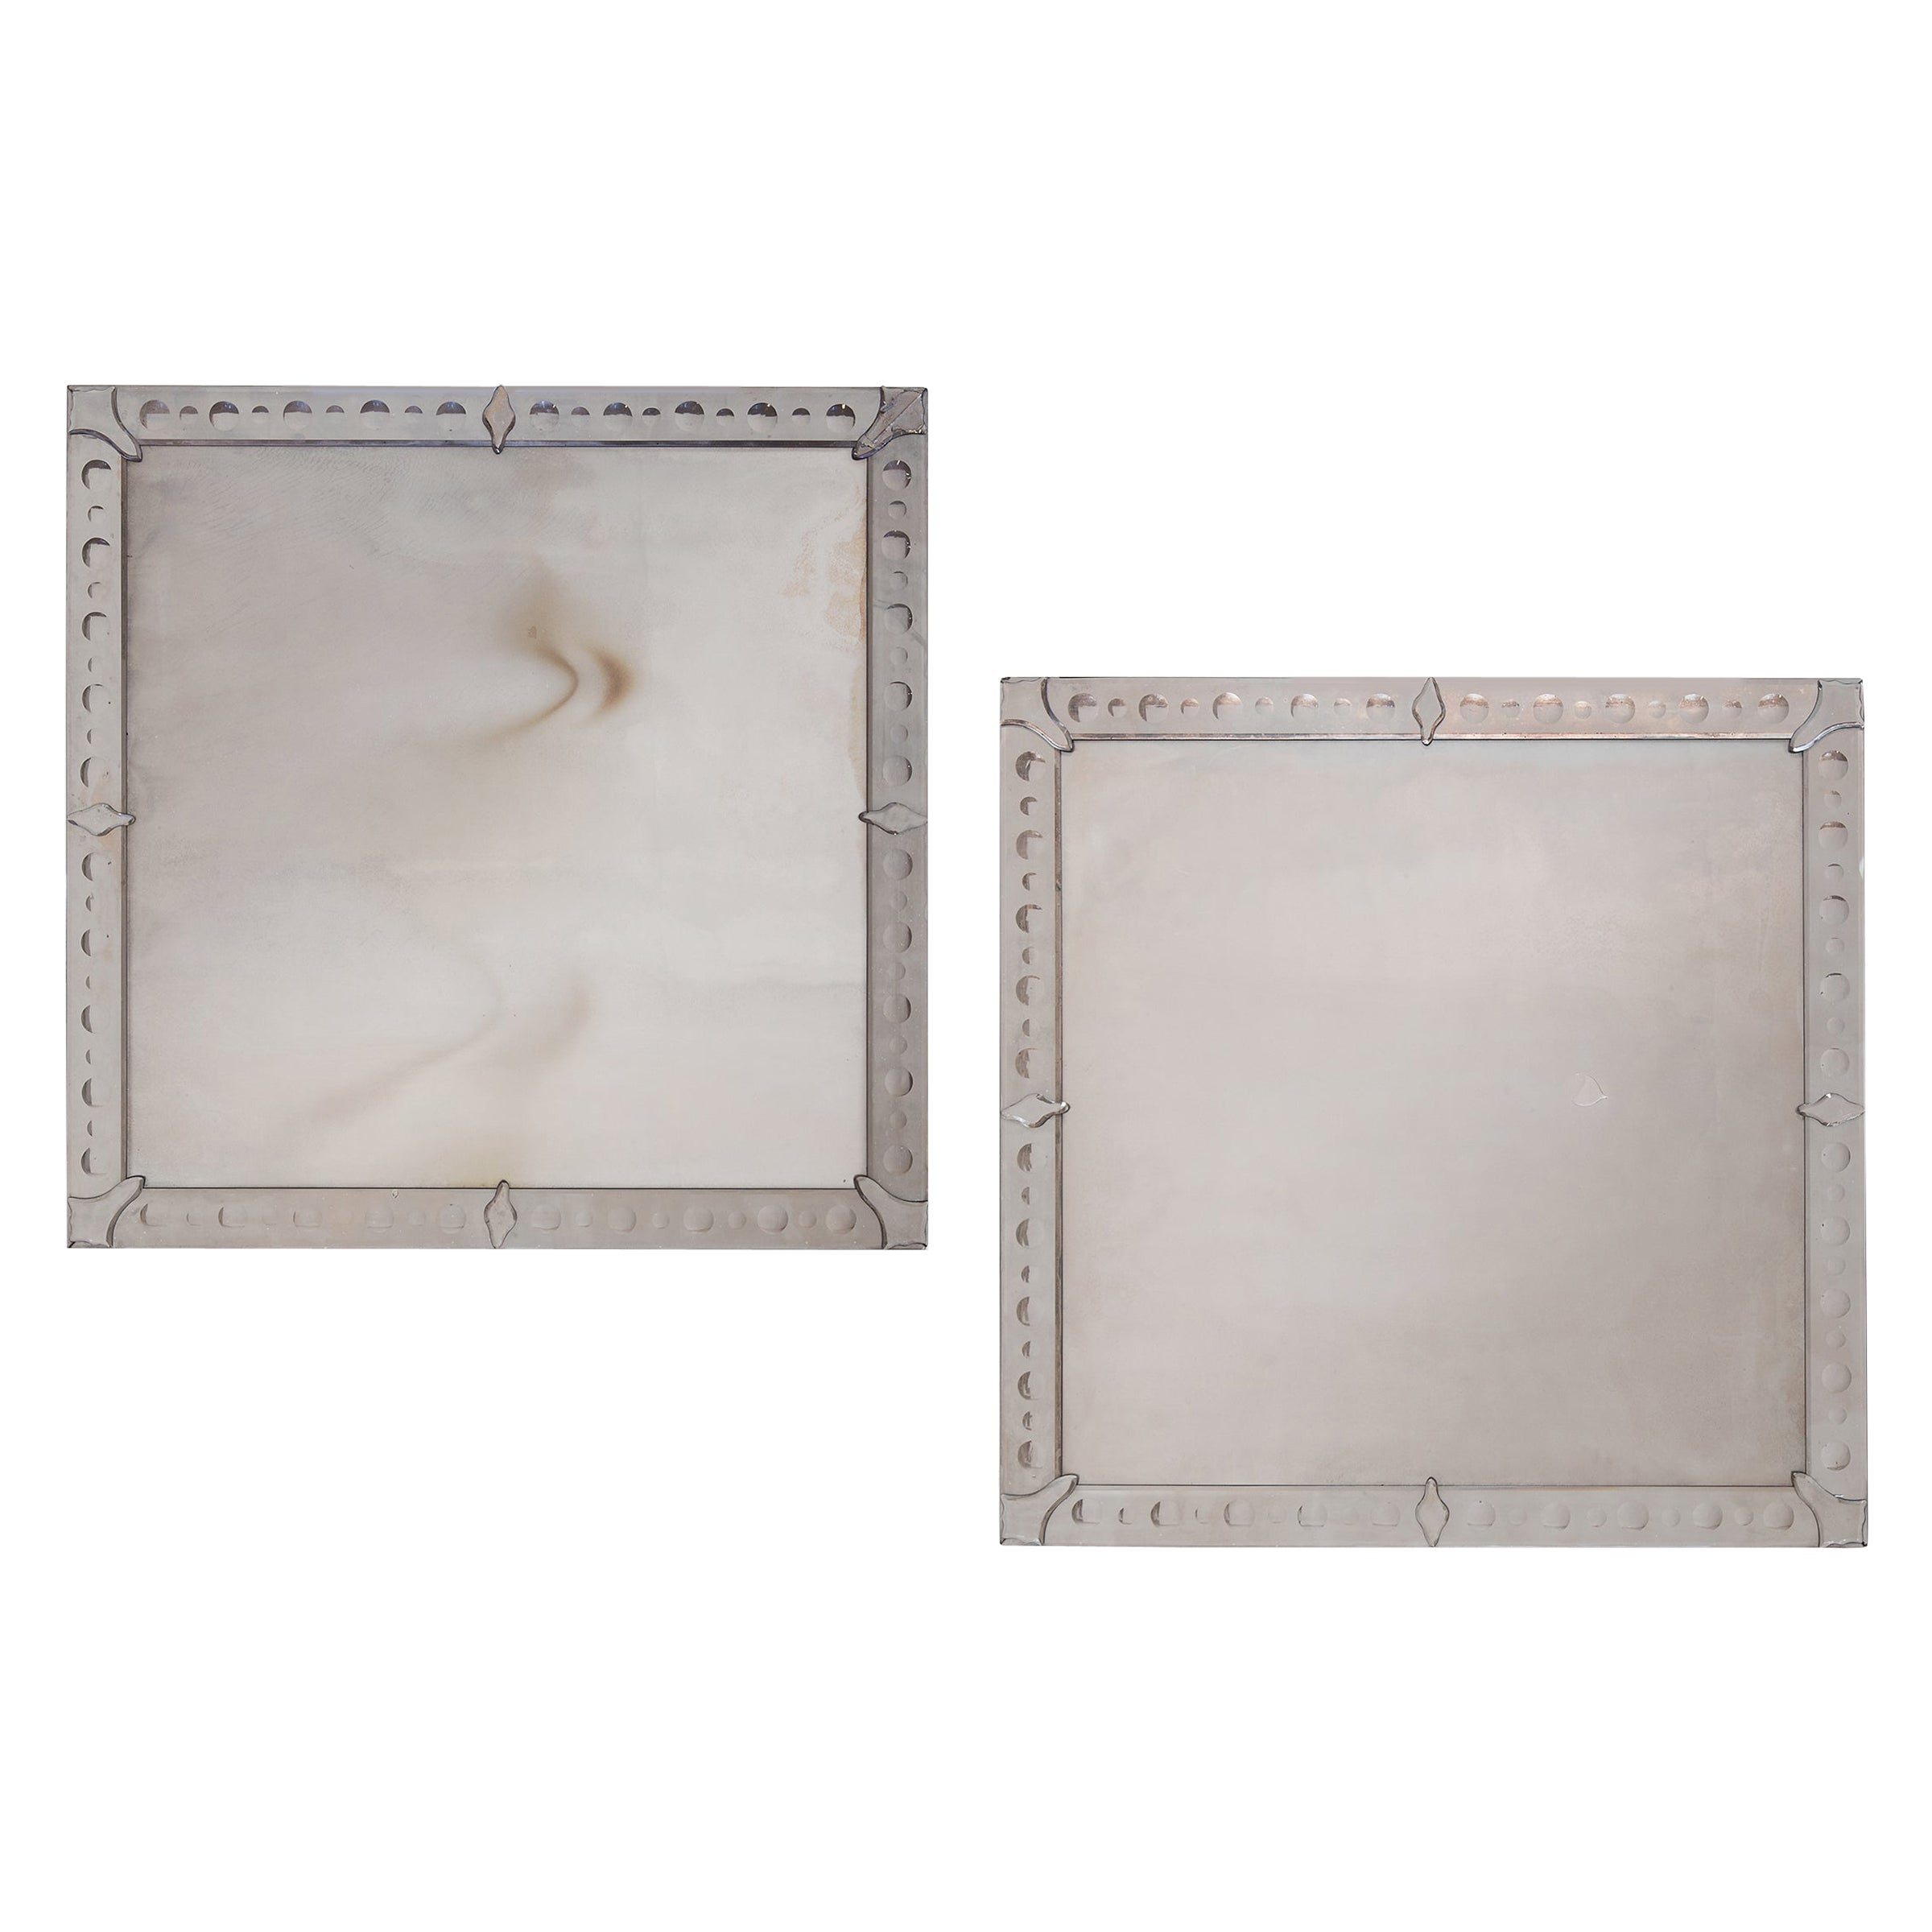 Pair of Square Wall Mirrors with Spoiled Glass